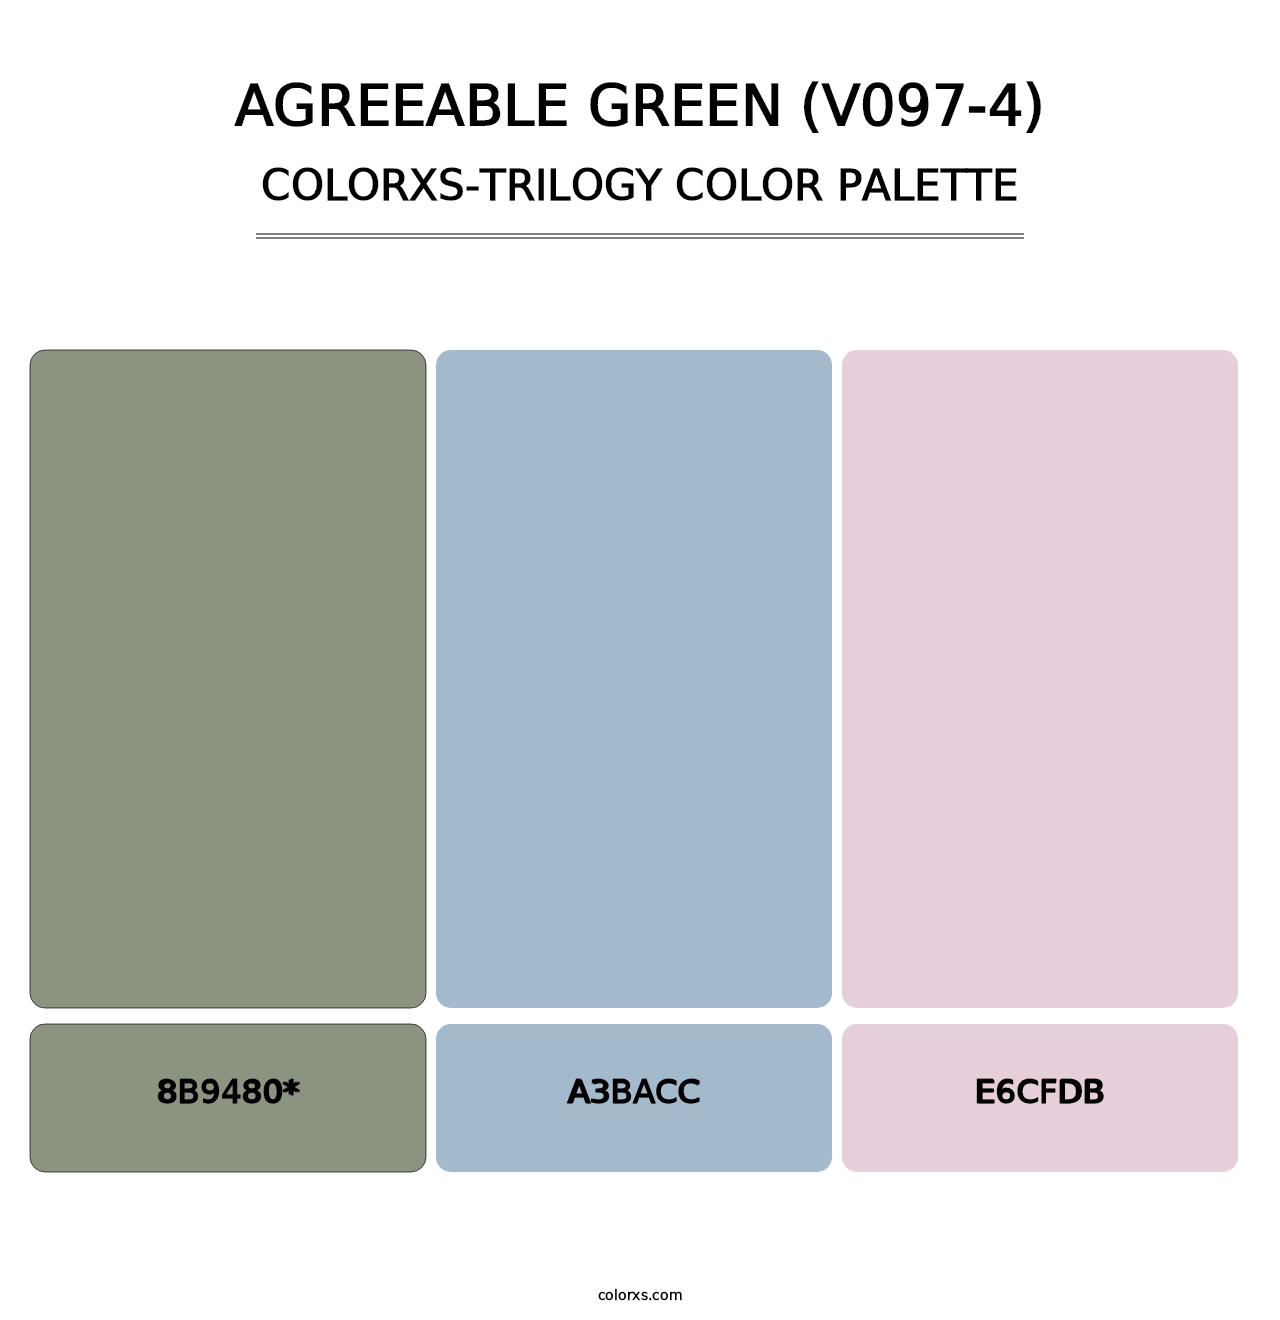 Agreeable Green (V097-4) - Colorxs Trilogy Palette